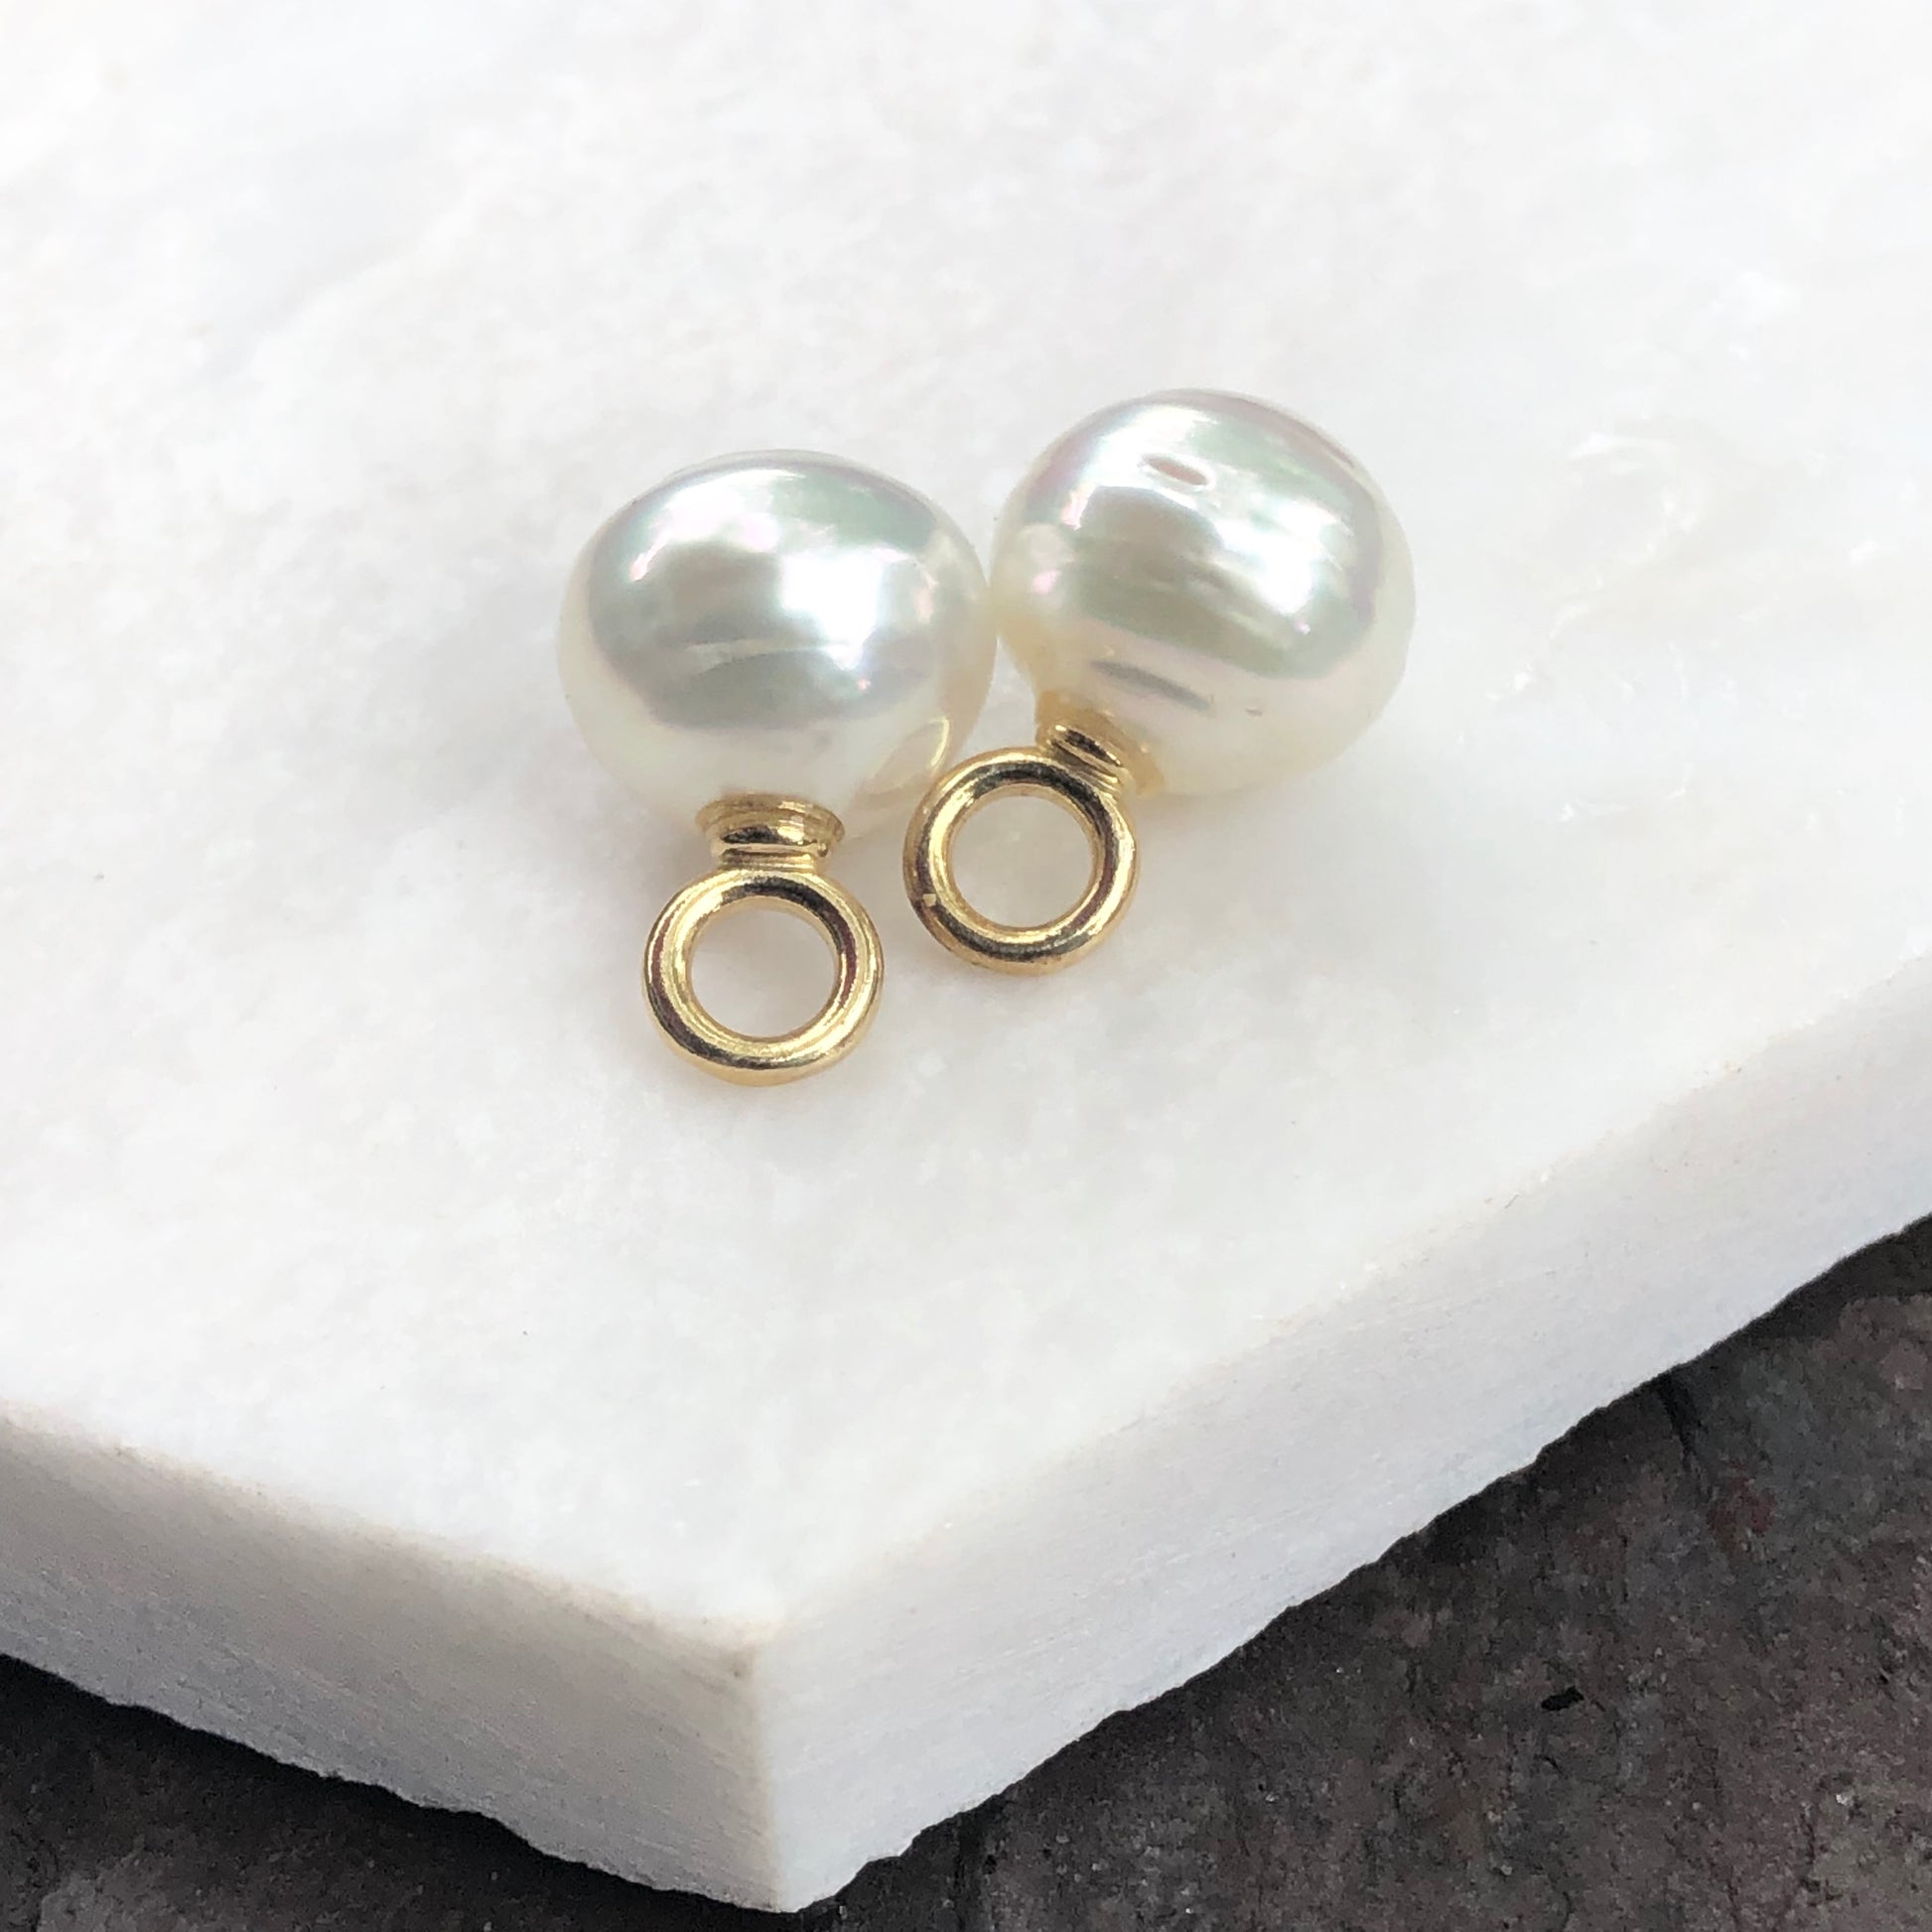 14KT Yellow Gold Paspaley South Sea Pearl Earring Charms 12mm, 14KT Yellow Gold Paspaley South Sea Pearl Earring Charms 12mm - Legacy Saint Jewelry